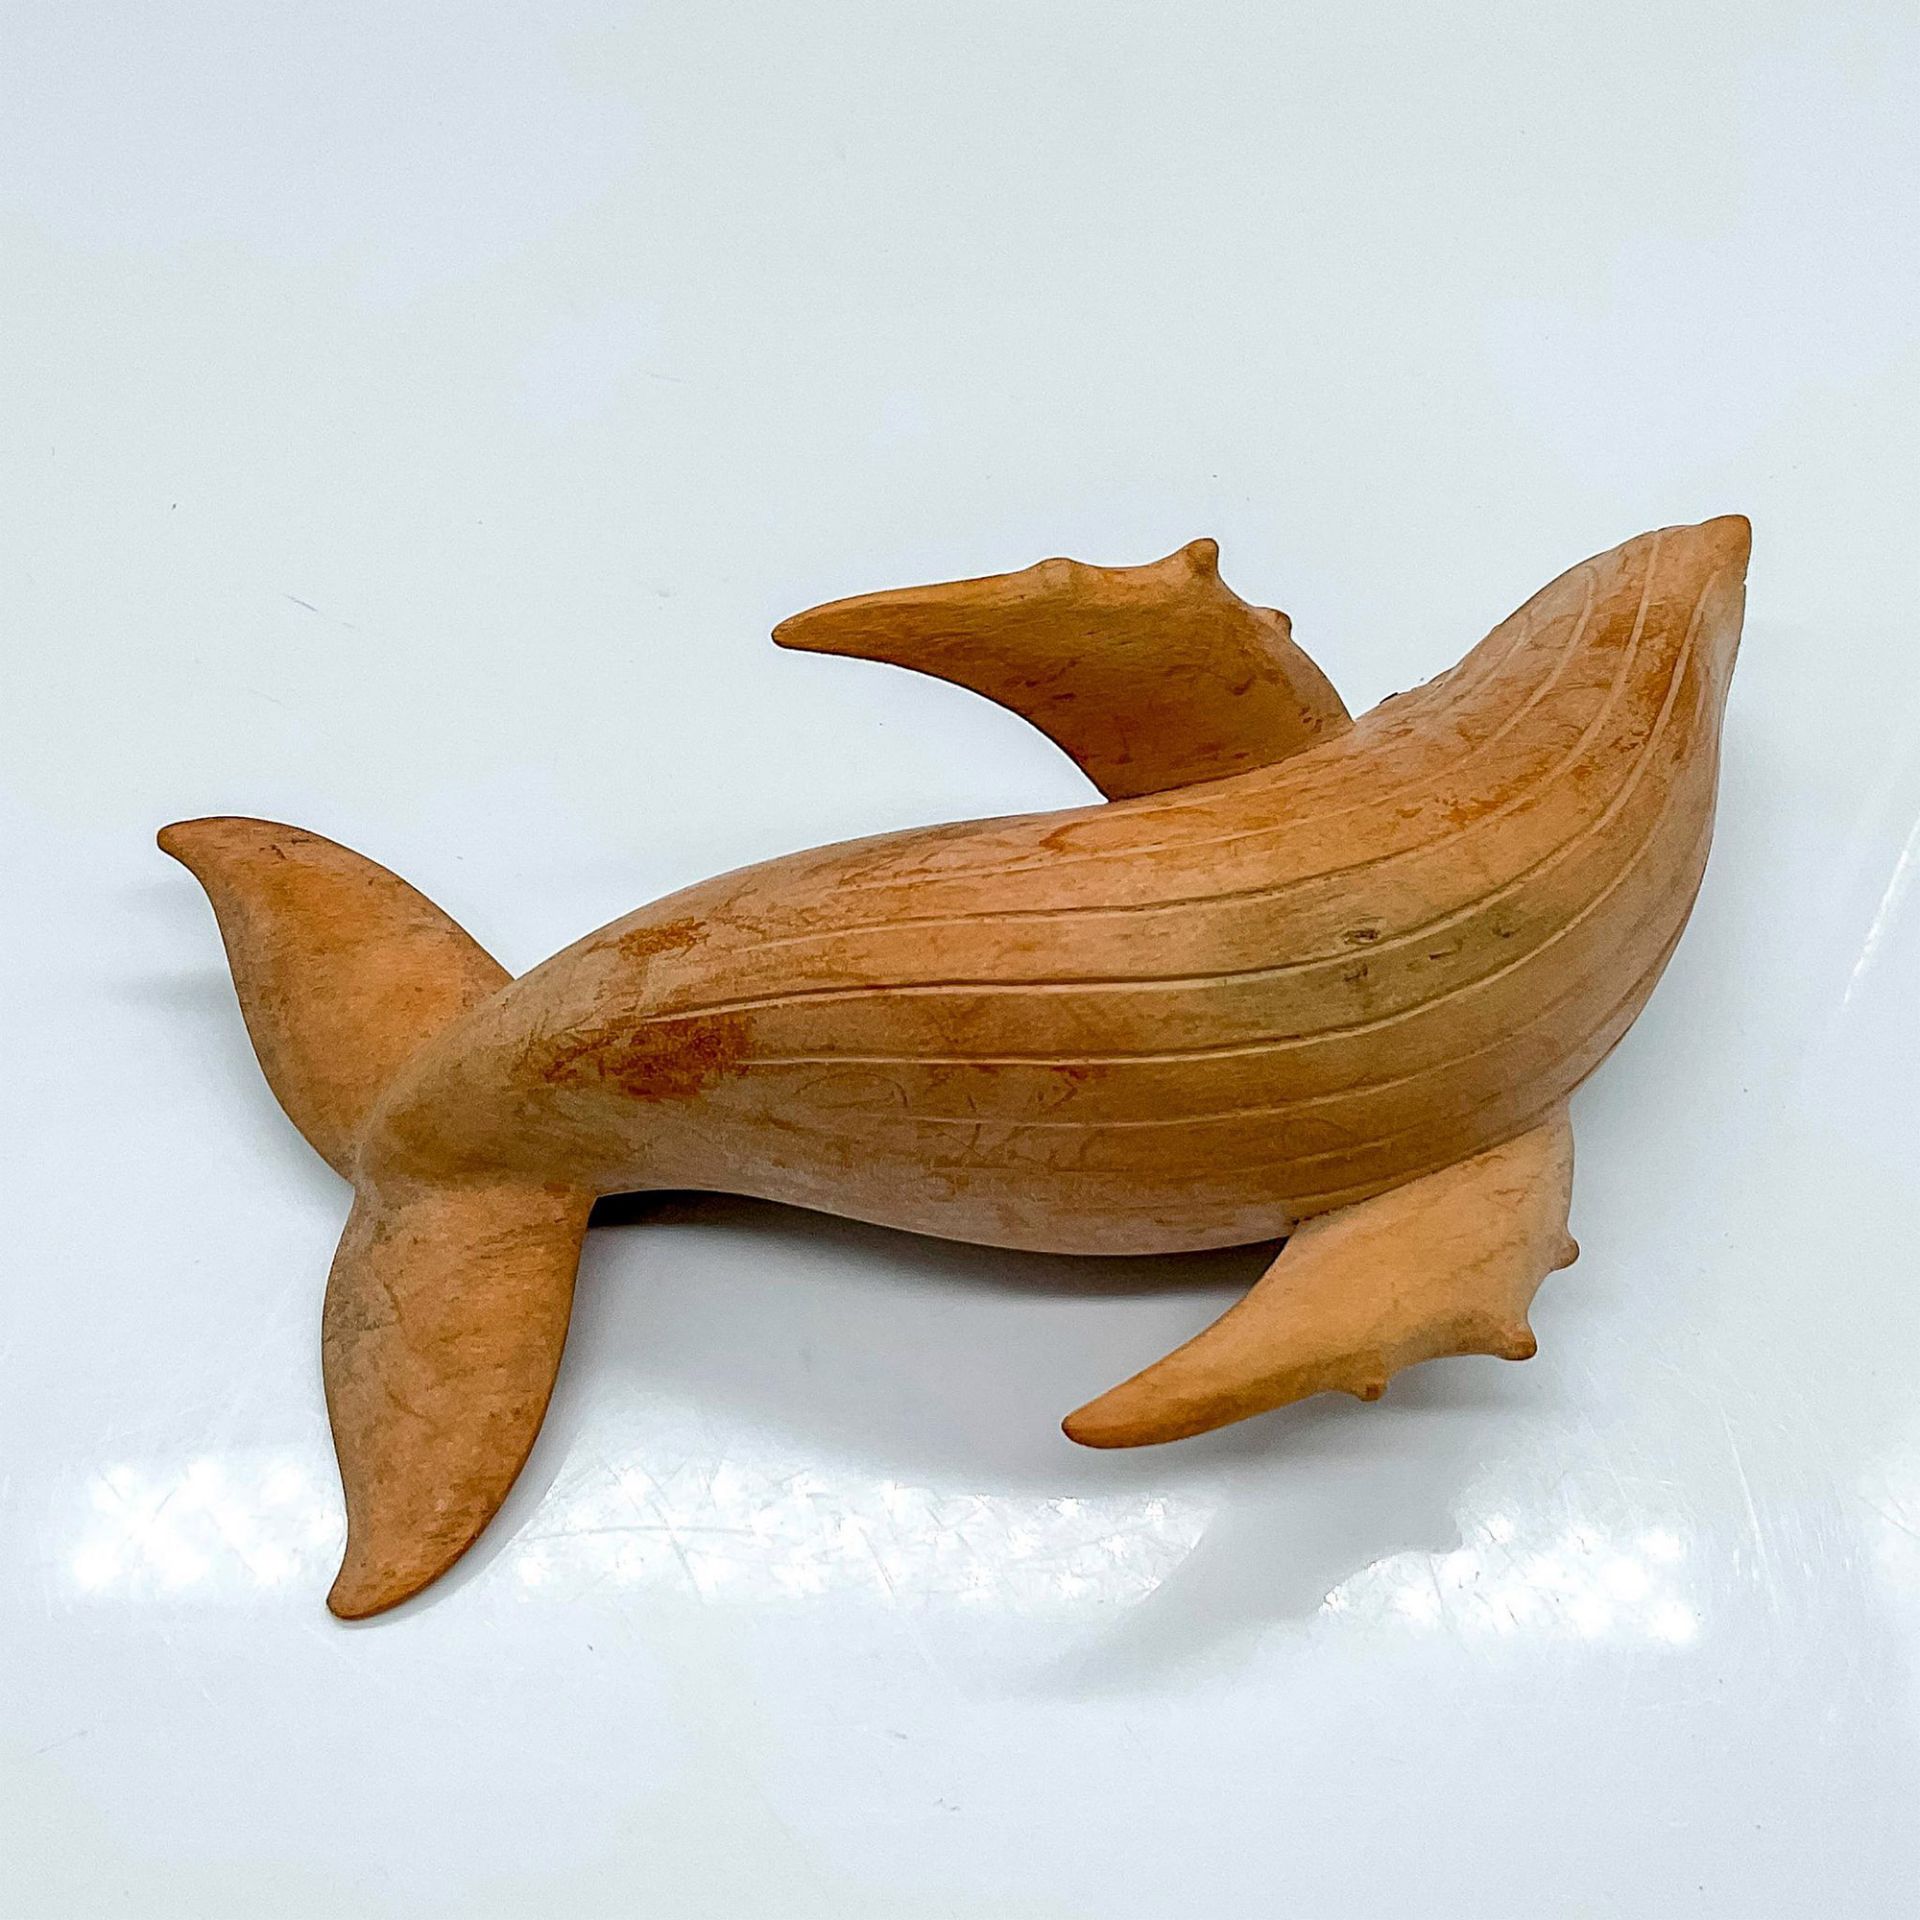 Vintage Hand Carved Wooden Whale Figurine - Image 3 of 3